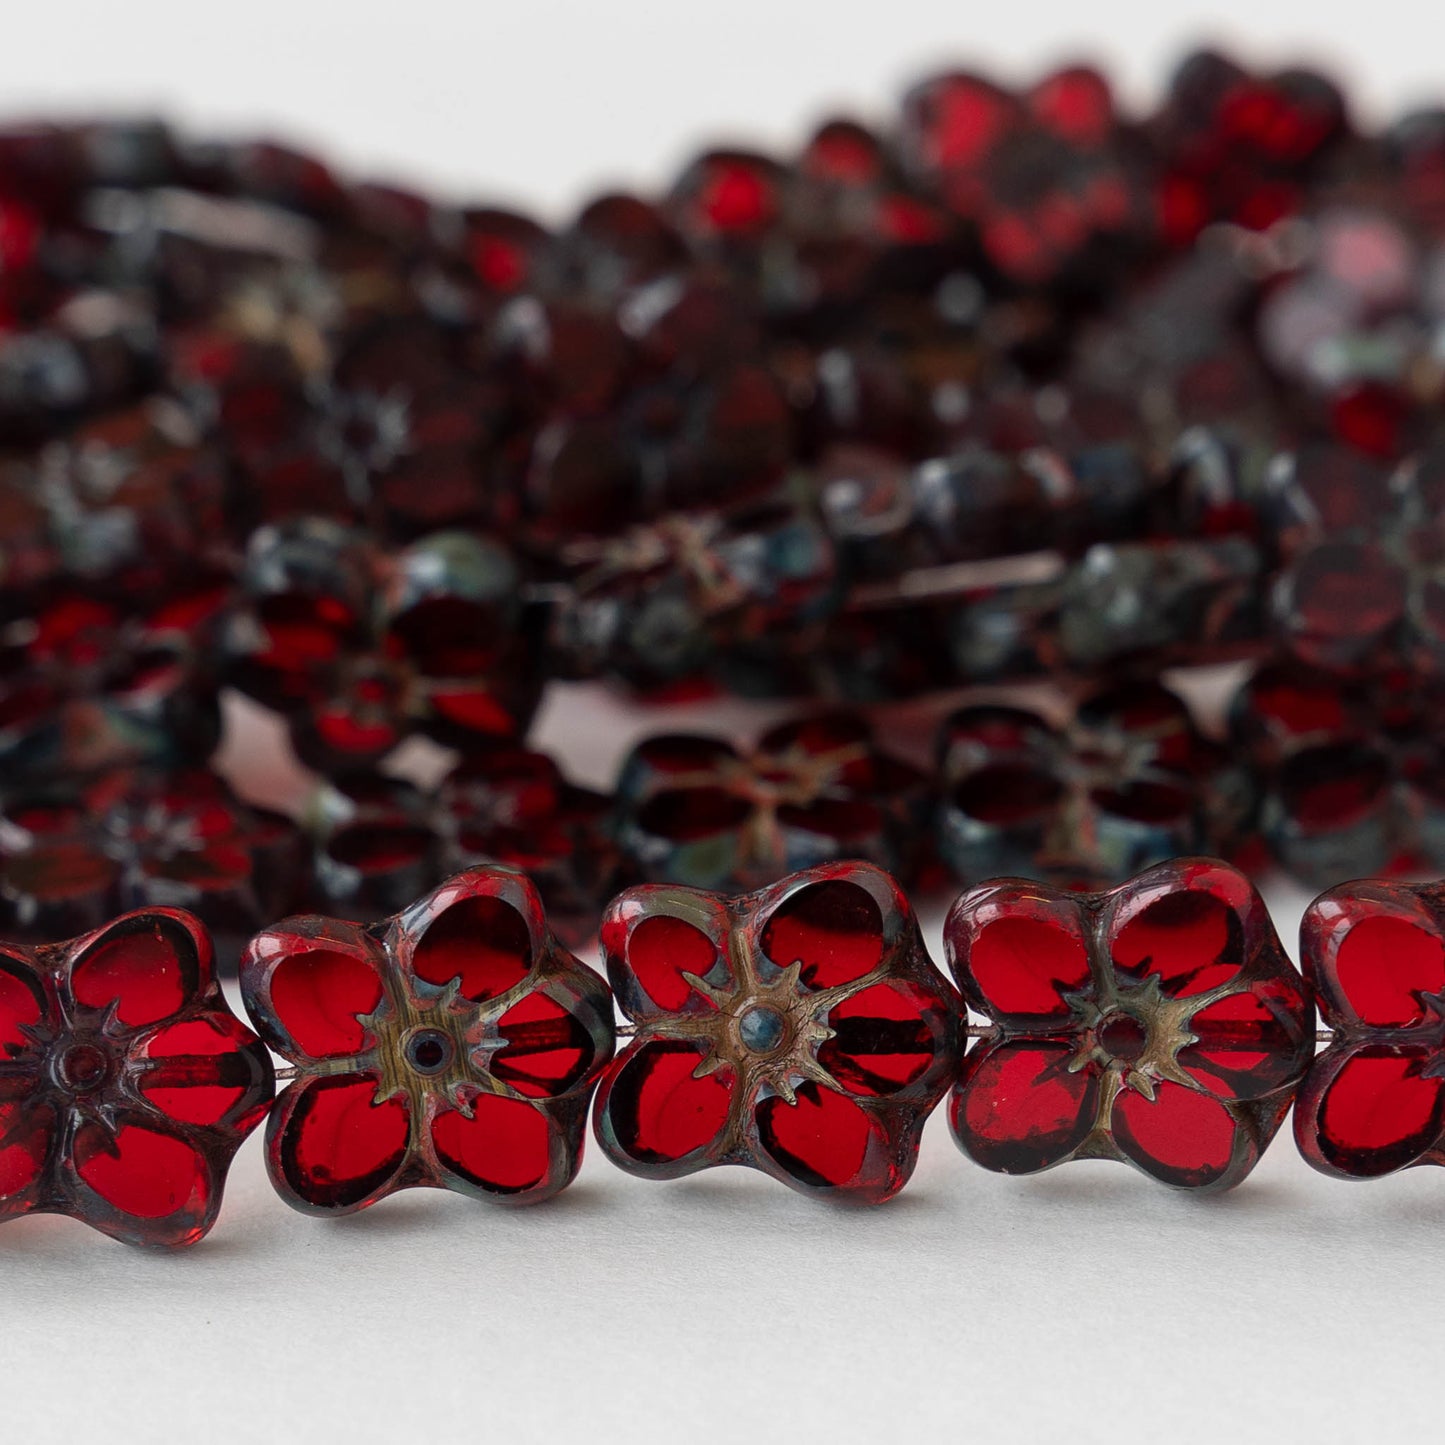 12x14mm Flower Beads - Ruby Red with Picasso Wash - 10 Beads